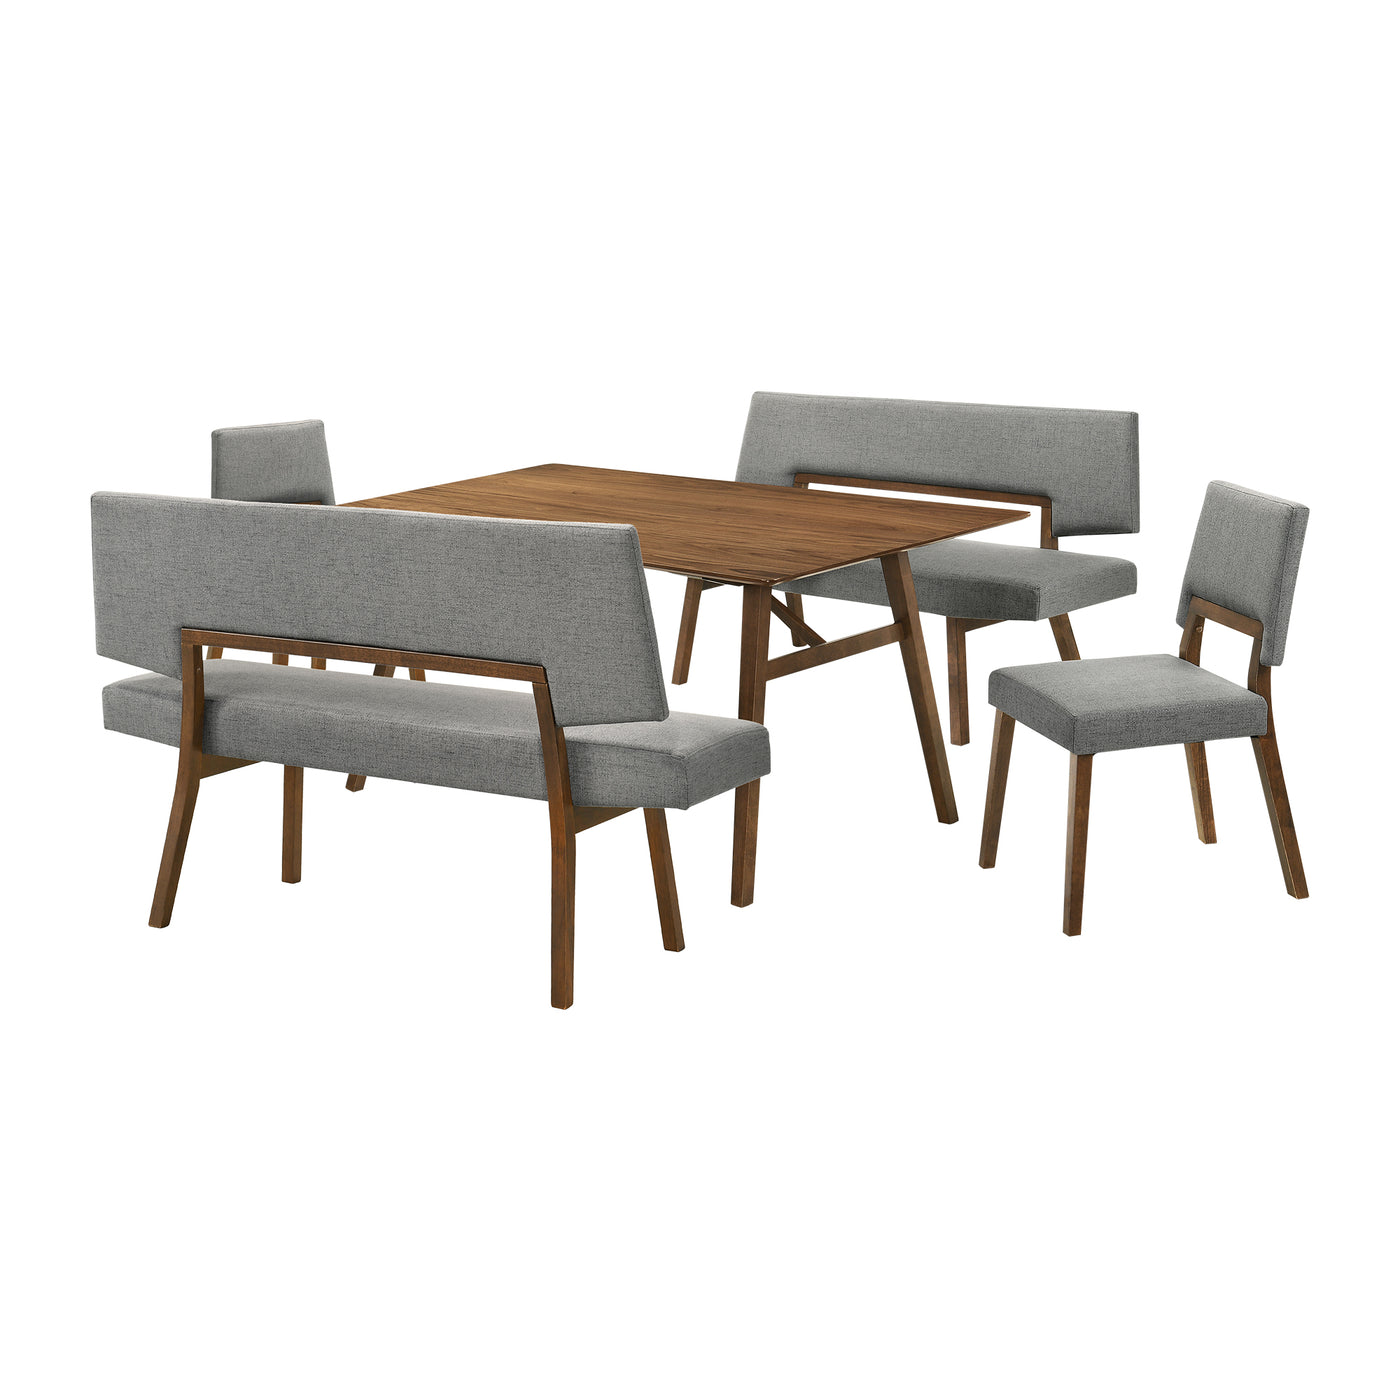 Channell 5 Piece Wood Dining Table Set with Benches